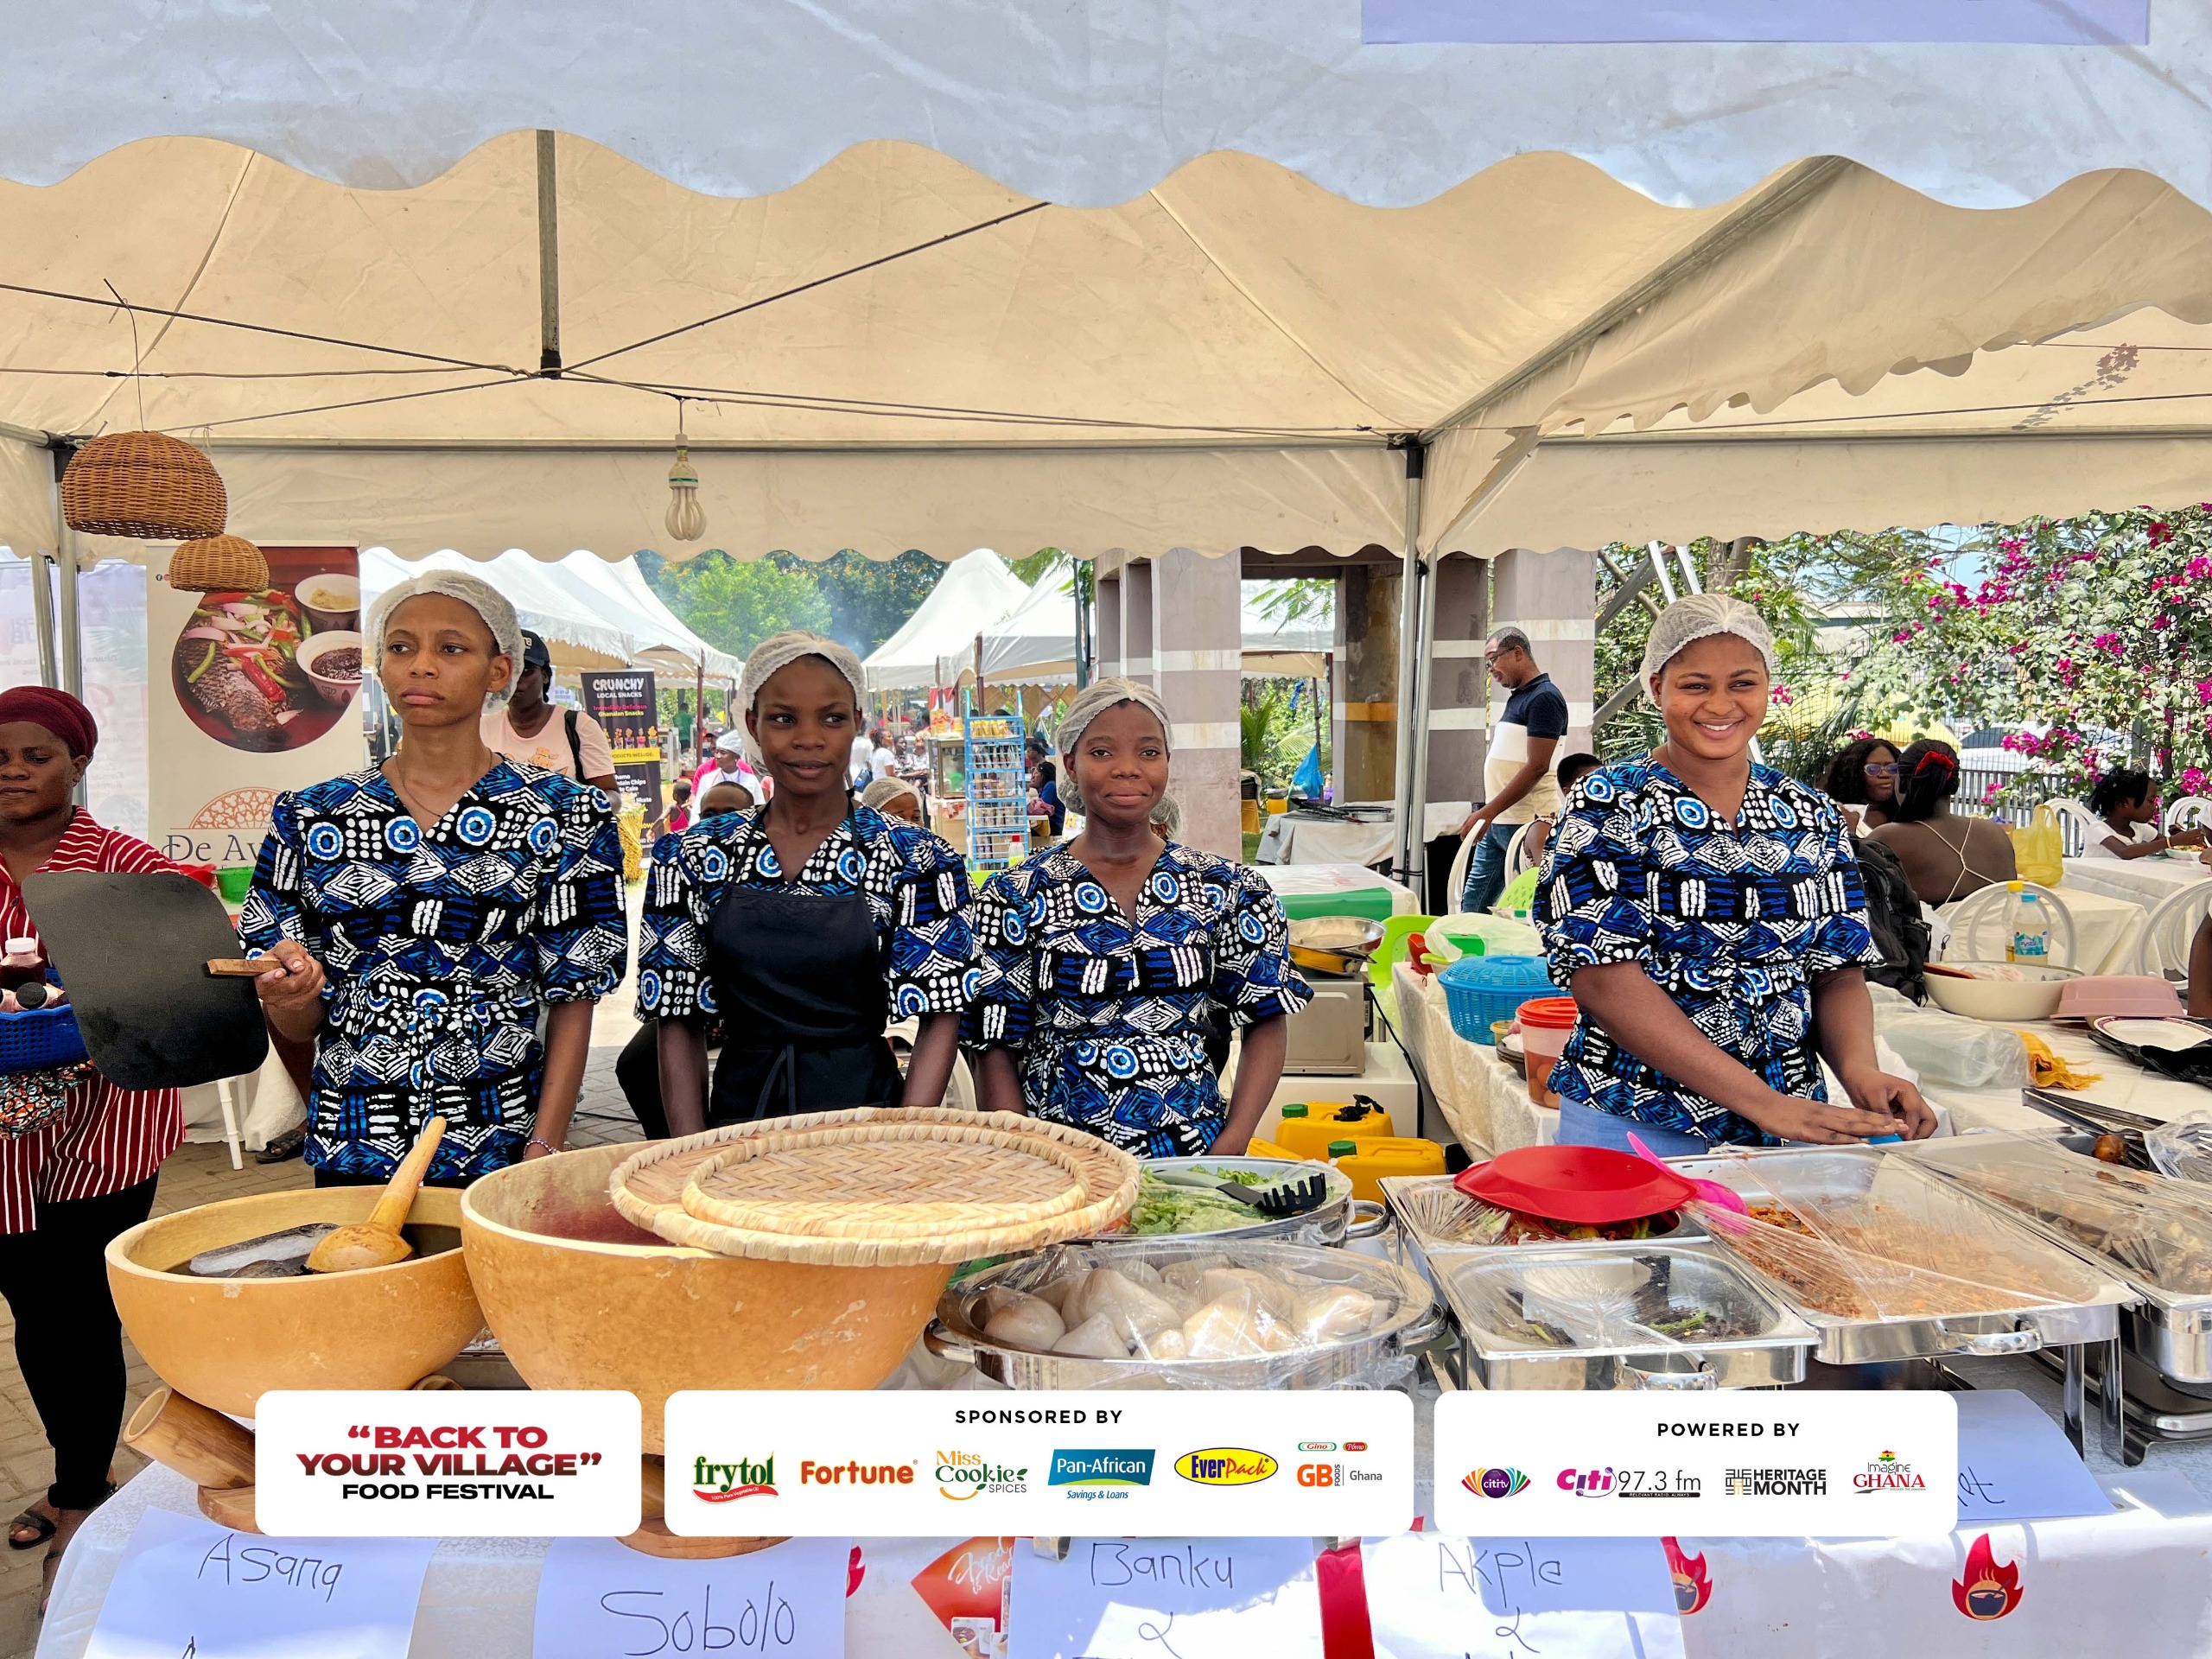 Back To Your Village Food Festival receives high praise from vendors and patrons